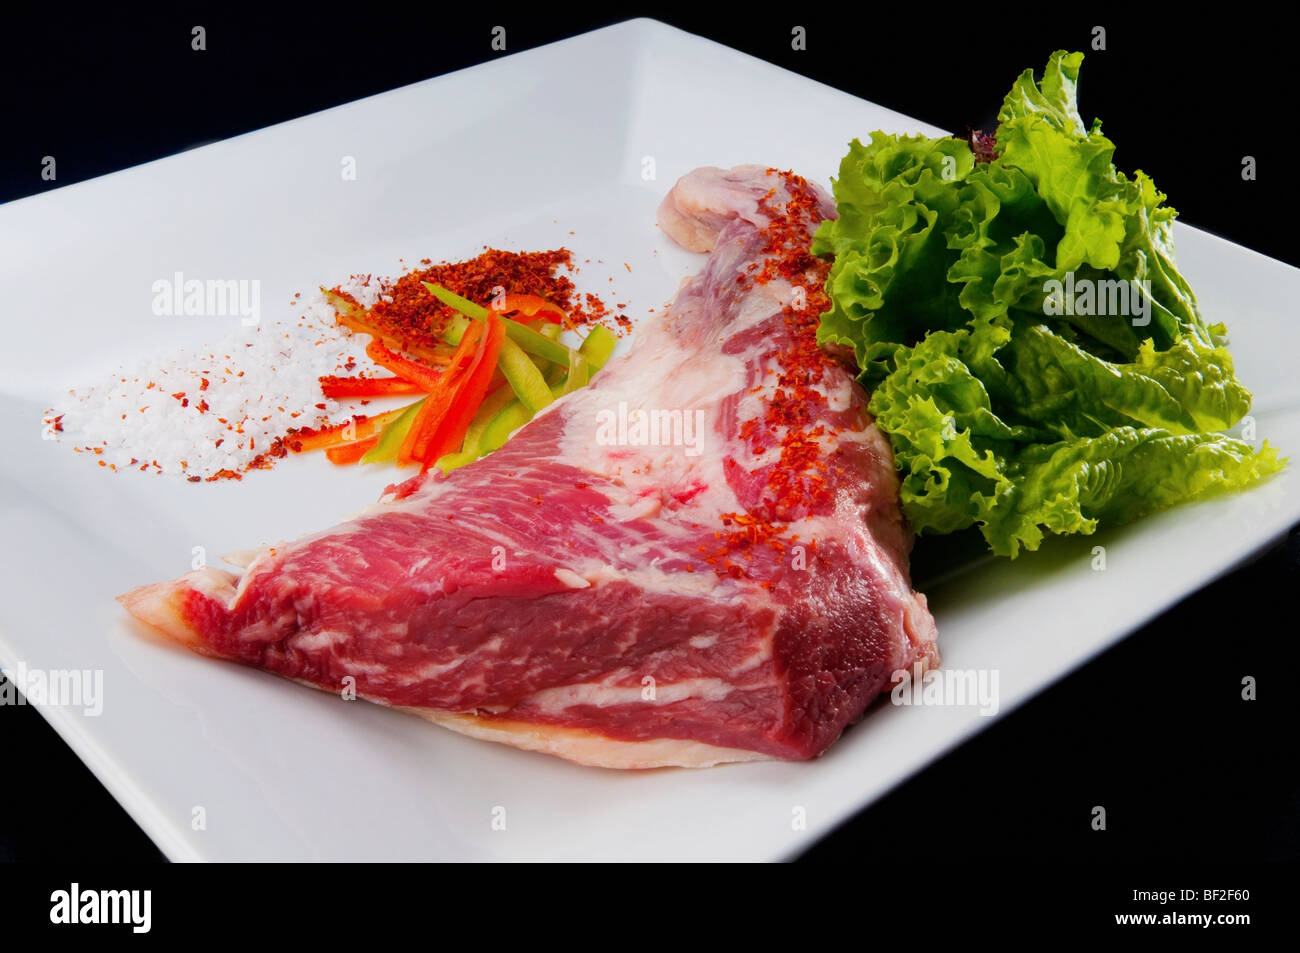 Close-up of a steak with ground red chilies and peppers Stock Photo